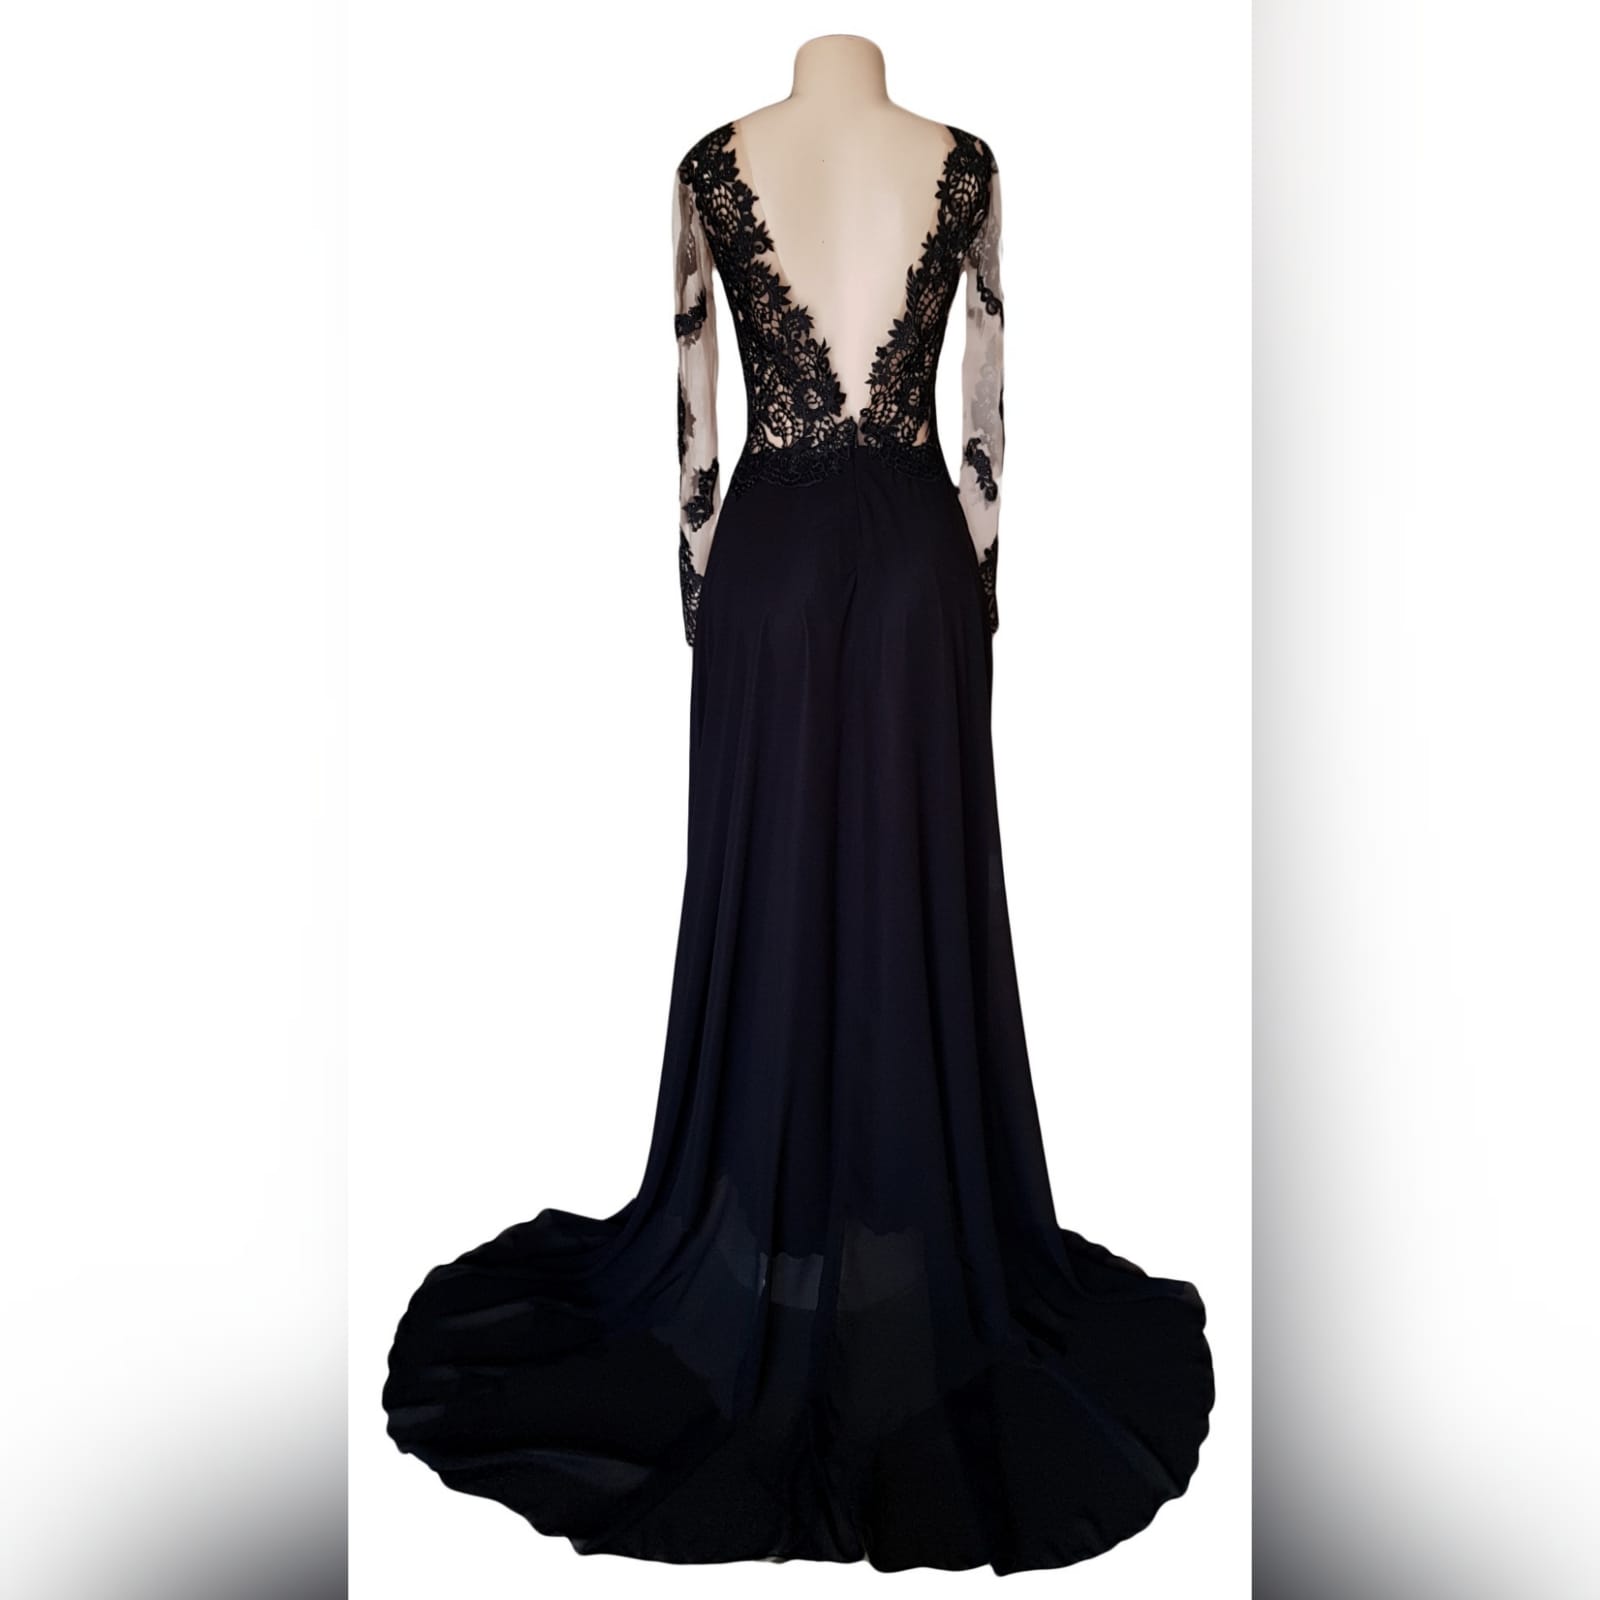 Black lace long flowy prom dress 3 black lace long flowy prom dress with an illusion plunging neckline, long illusion lace sleeves, v open back with a train and a slit.